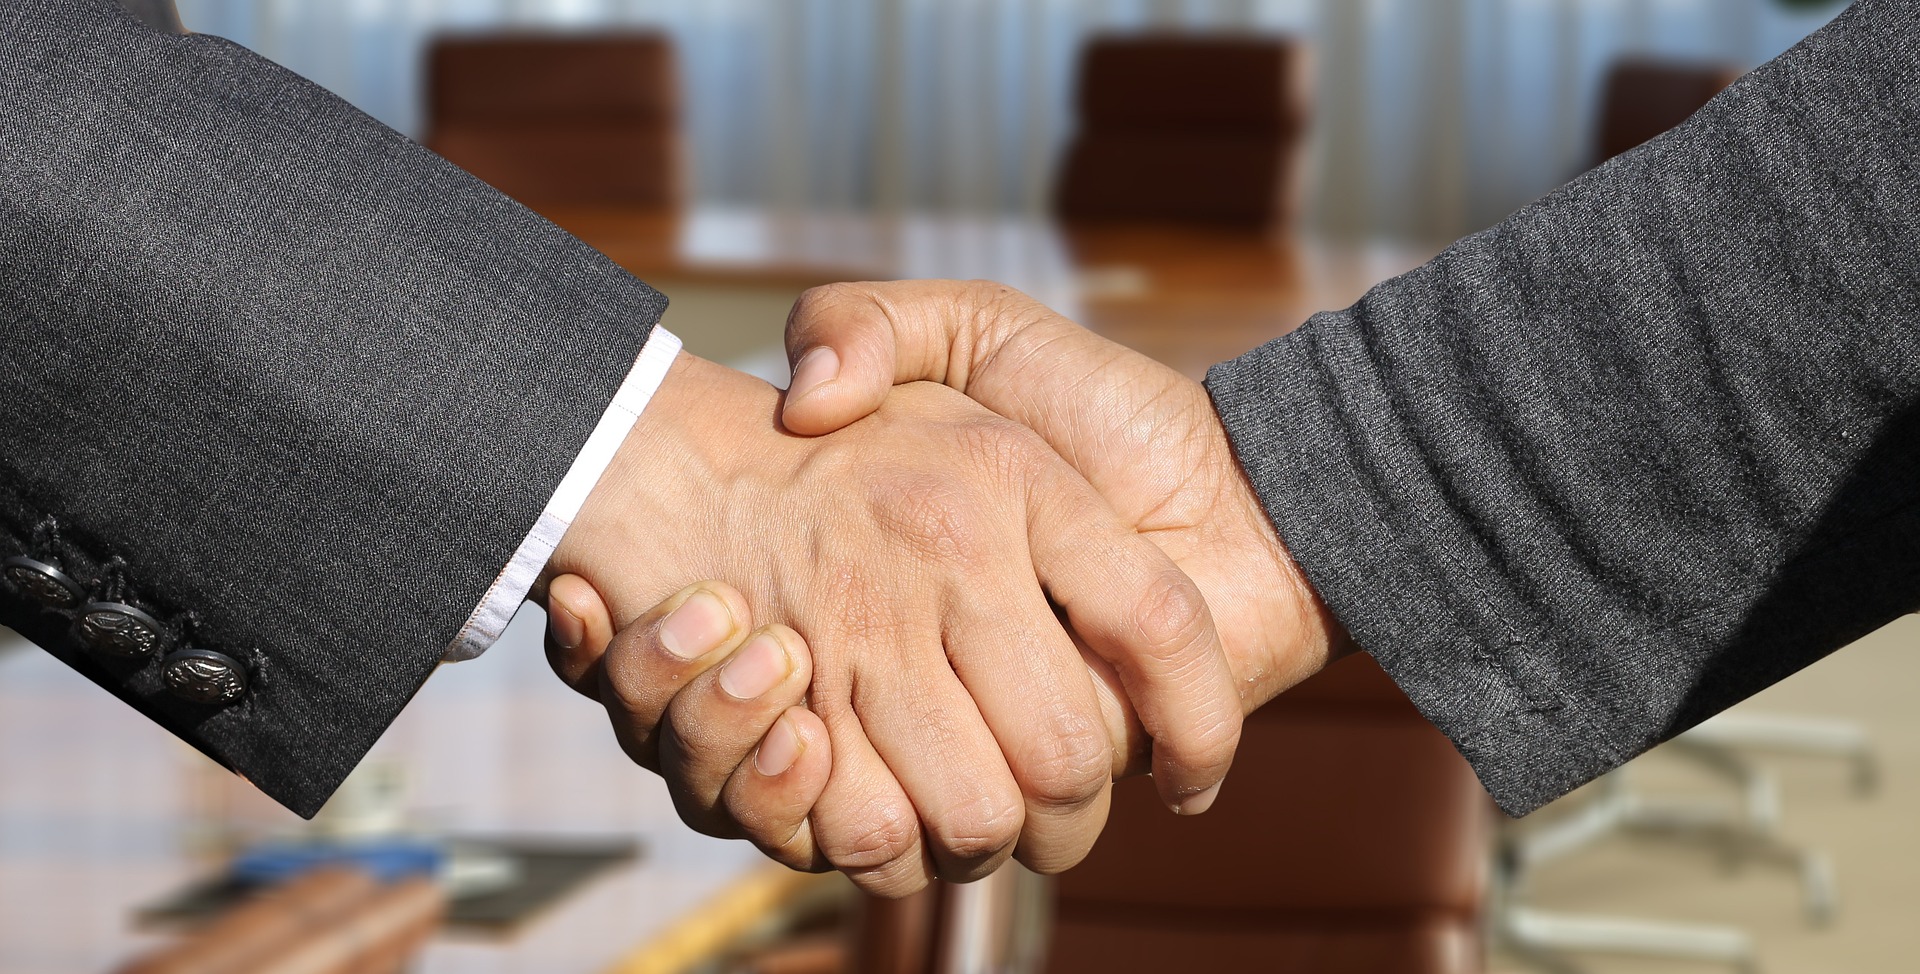 An image of a handshake by two men in grey suits. Just their arms and hands are visible.